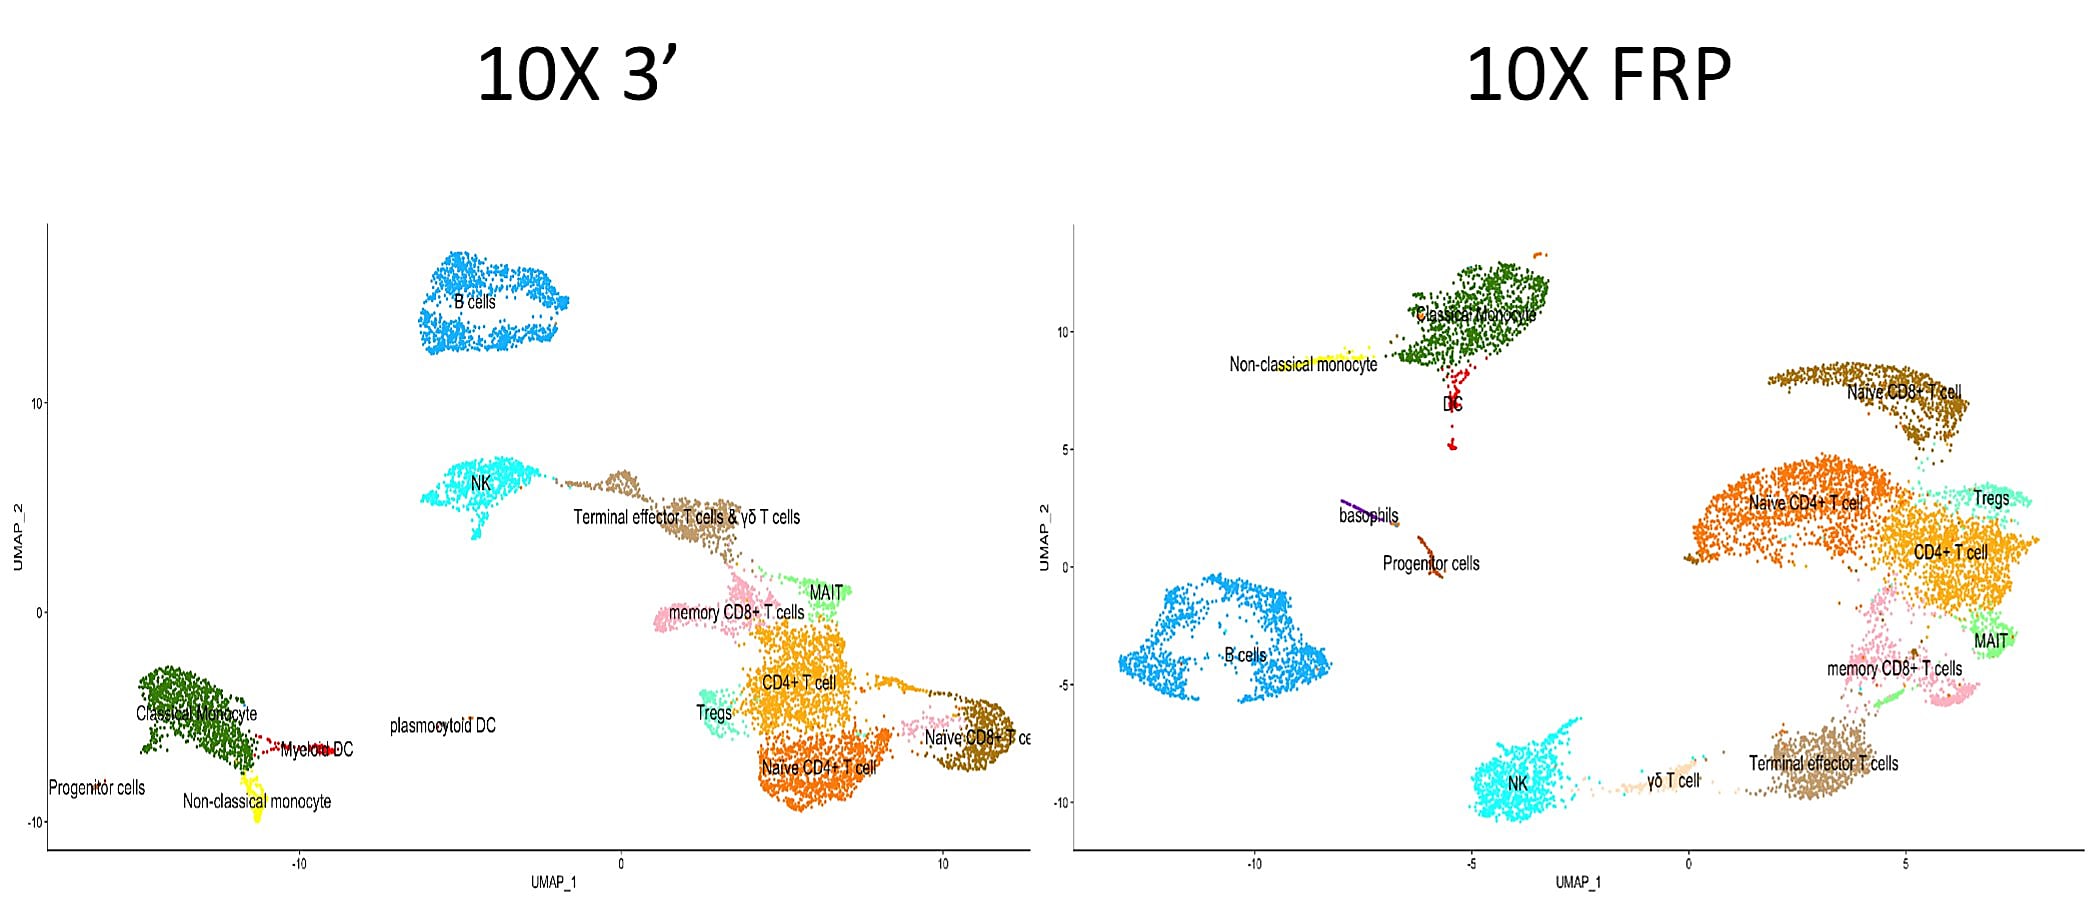 Figure 2. UMAP clustering of data from the Chromium Single Cell Gene Expression 3’ kit (10X 3’; left) and Chromium Single Cell Gene Expression Flex (10X FRP; right), by @HutchInnovation.